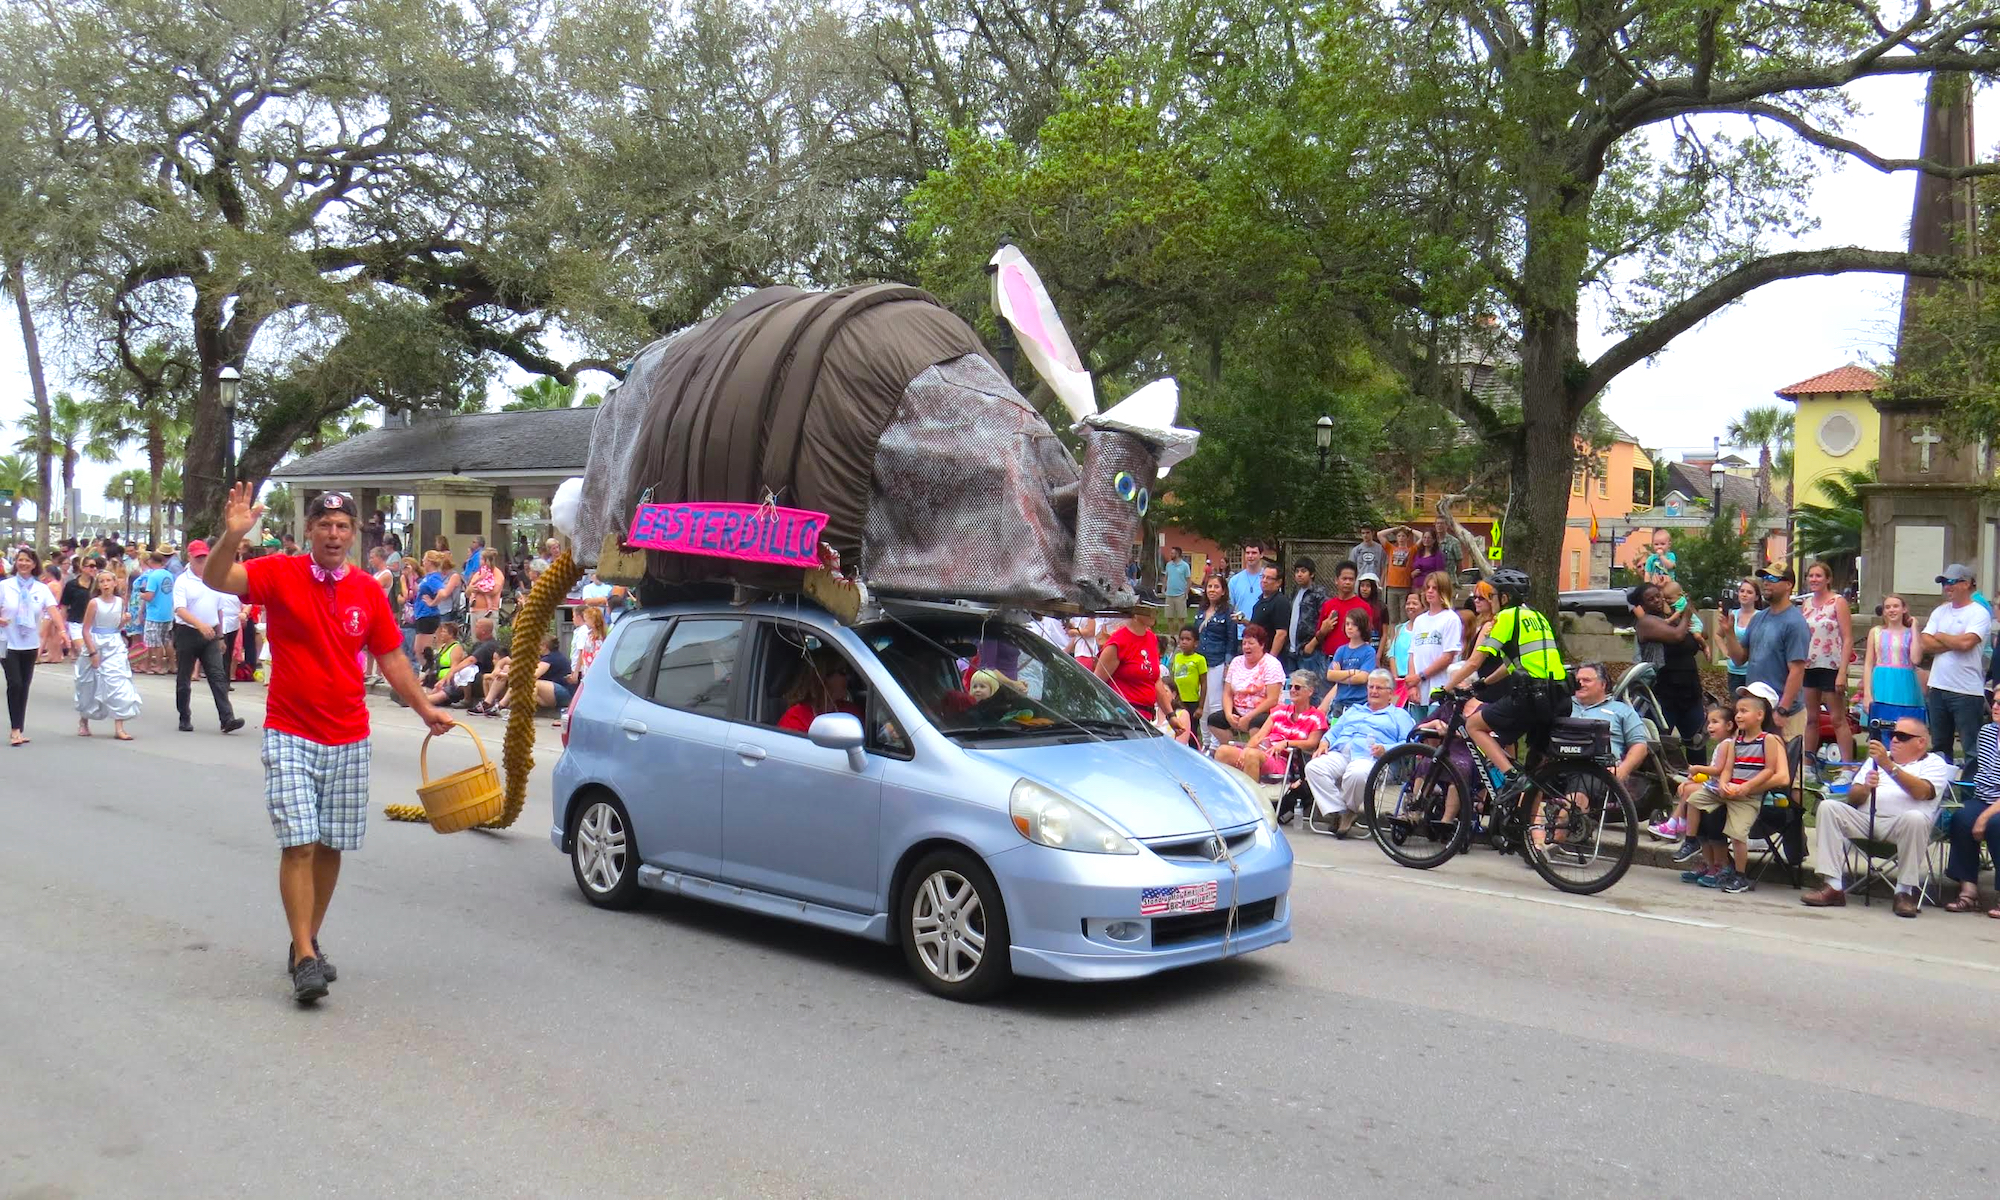 A car in the Easter Parade, with a handmade armadillo on top, and onlookers admiring it.